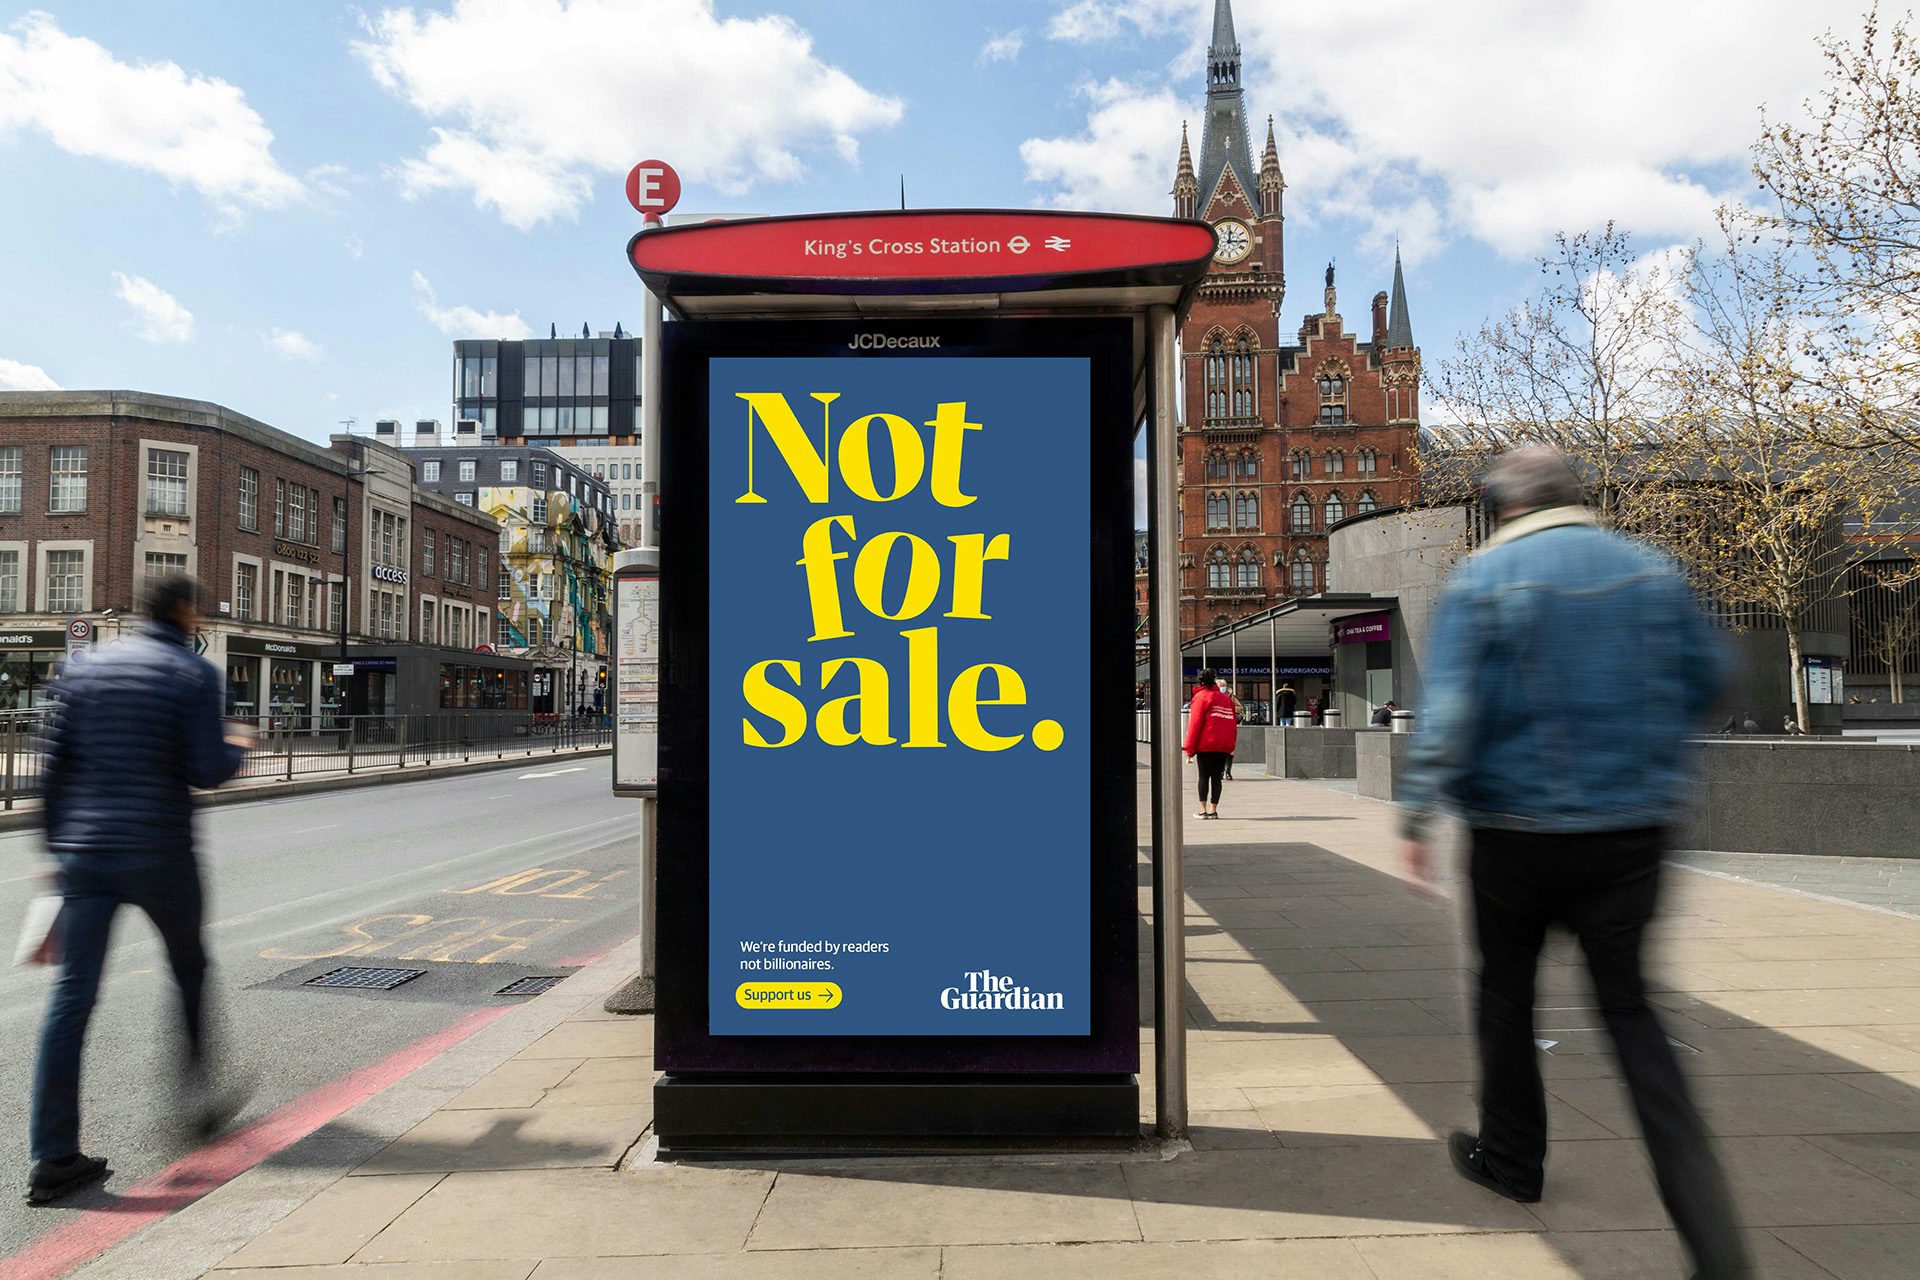 Photo of a vertical outdoor poster headlined 'Not for sale' in slightly wonky yellow letters on a blue background, shown on a bus stop in front of King's Cross Station created as part of the Guardian's new brand campaign